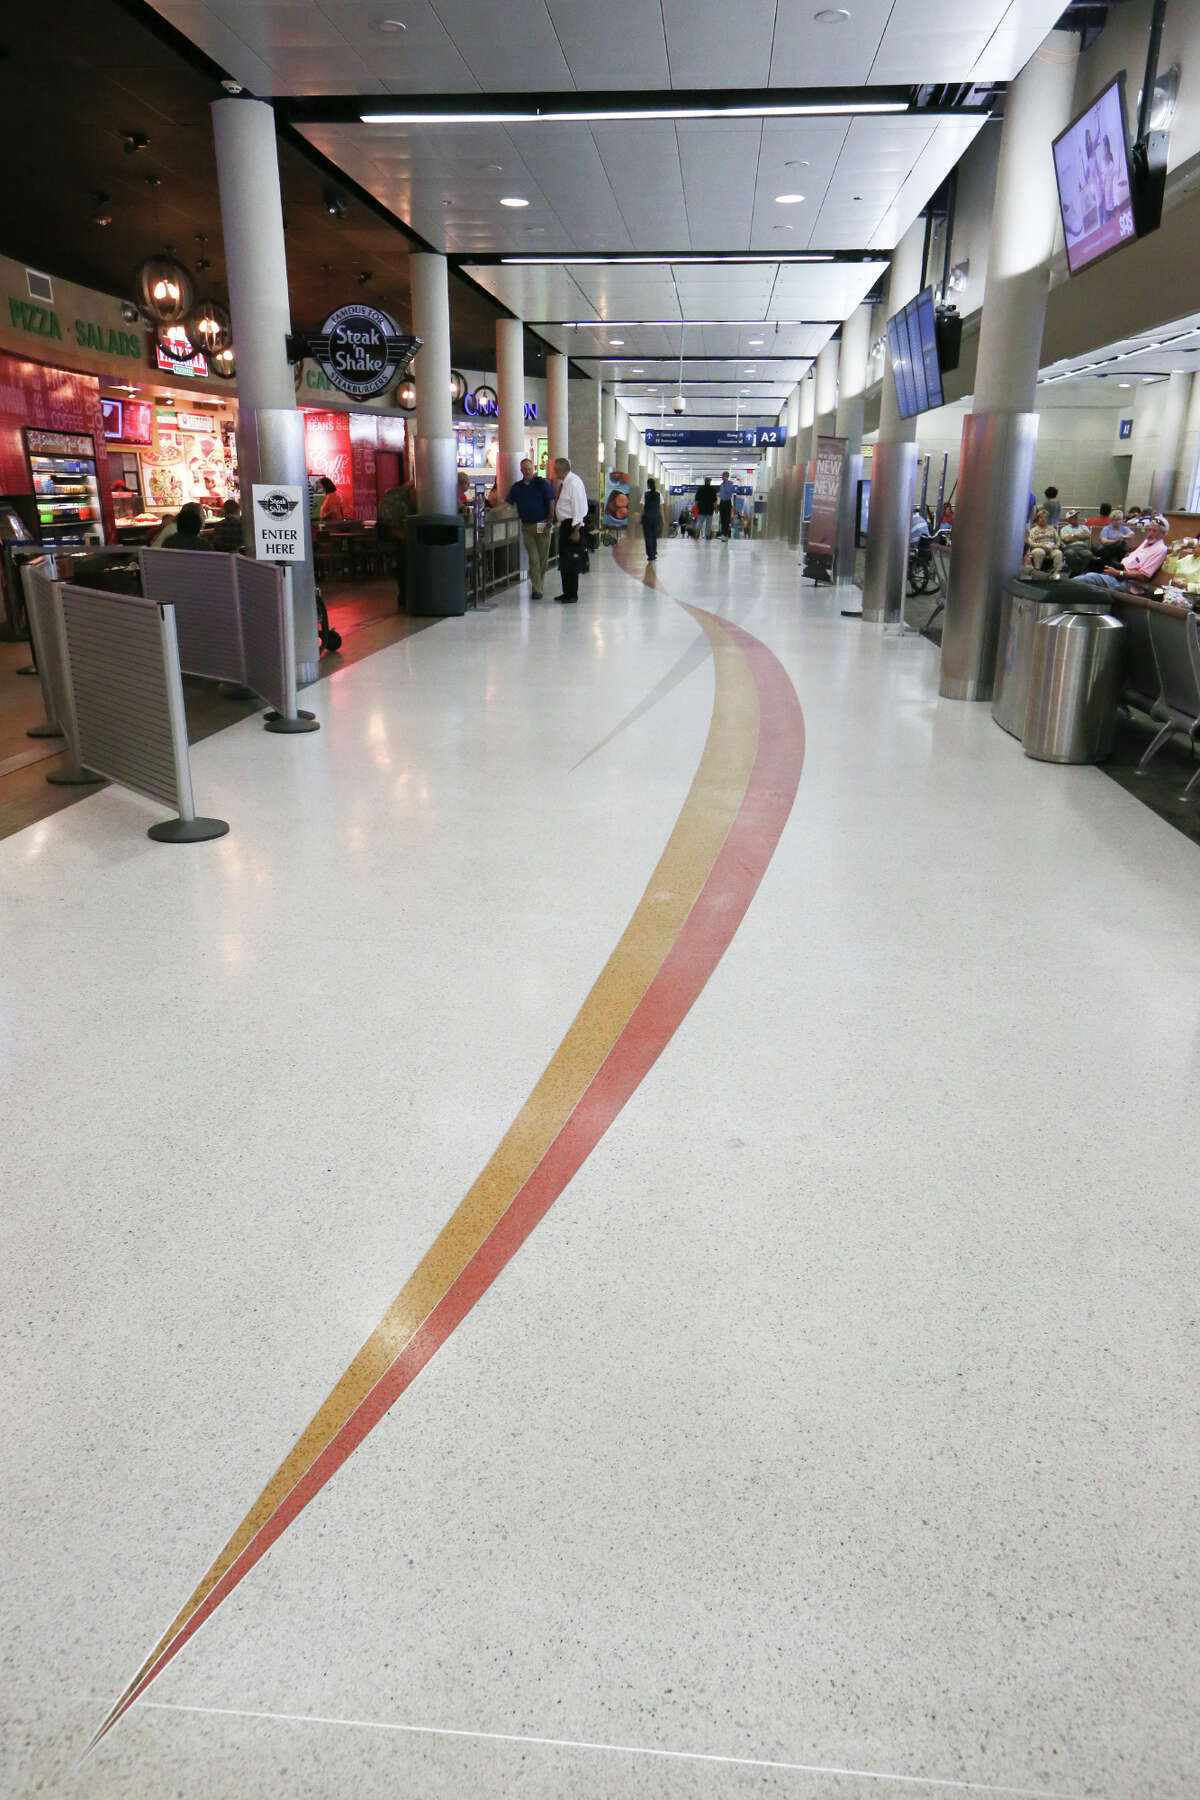 New tile flooring was part of a $35.6 million project to renovate Terminal A at the San Antonio International Airport, as seen in this 2014 photo.